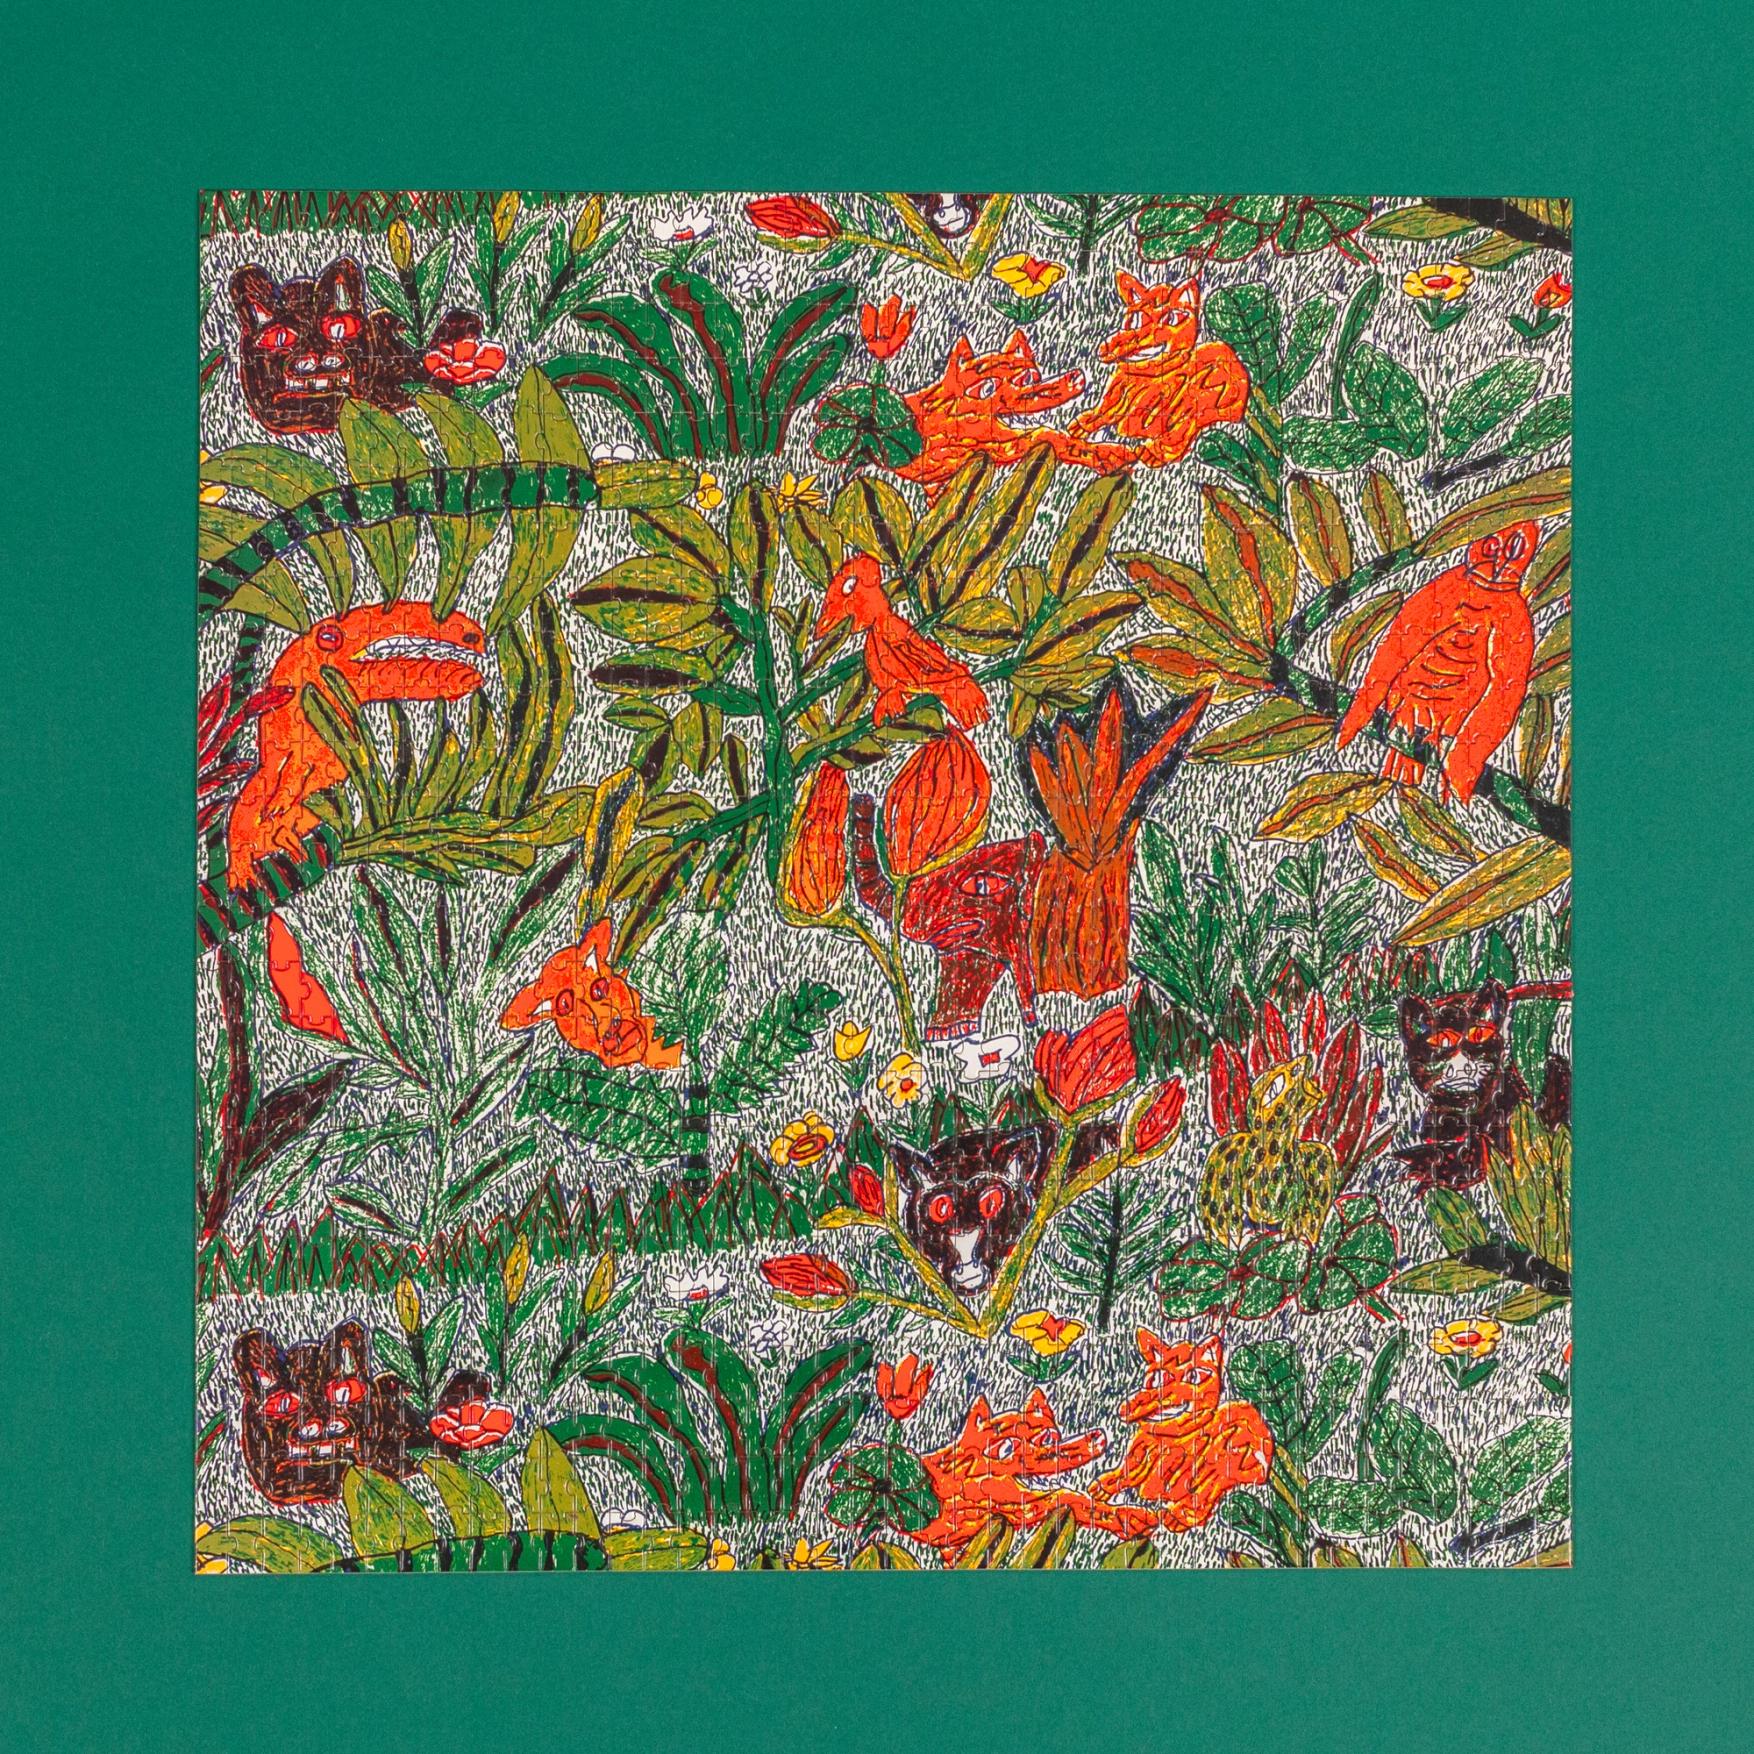 The image shows the completed puzzle against a dark green background. It is the same pattern of jungle plants and animals as is shown on the front of the box in the first photo.